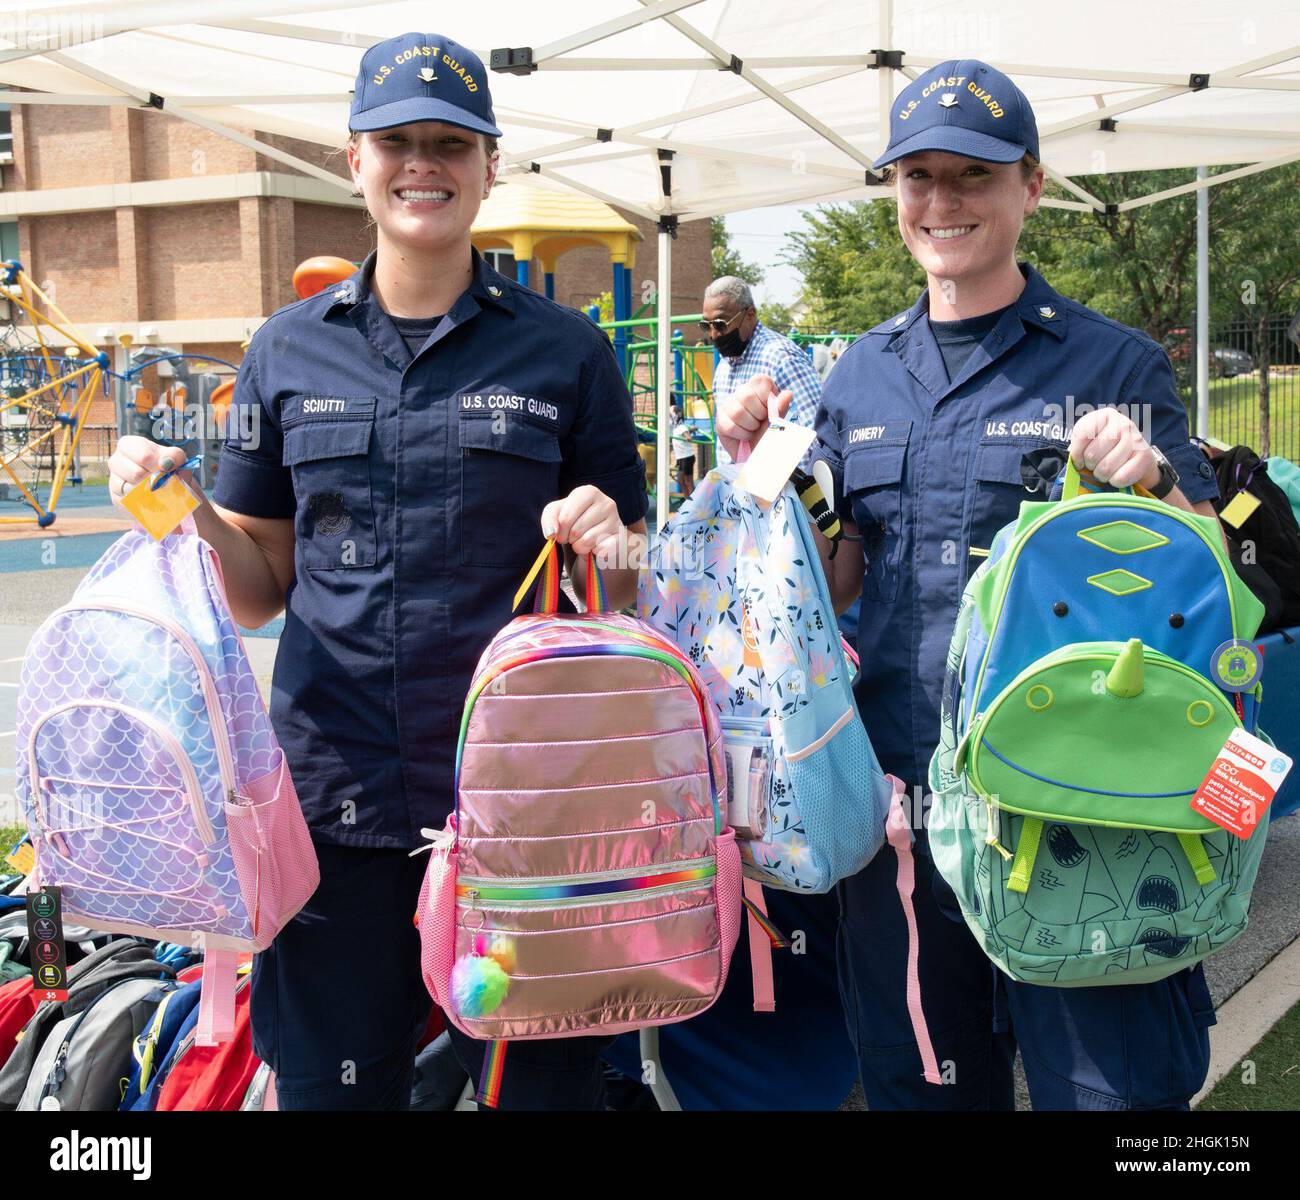 Petty Officers 3rd Class Devin Sciutti (left) and Summer Lowery hold up just a few of the 289 backpacks filled with supplies that were handed out to students at Anita J. Turner Elementary School during a back-to-school night event on Thursday, August 26th. USCG’s annual St. Elizabeth’s Back-to-School backpack and supply drive provides D.C. community students with gear and equipment to prepare for the new school year. This year, the annual drive was part of the Coast Guard's Partnership in Education Program. Stock Photo